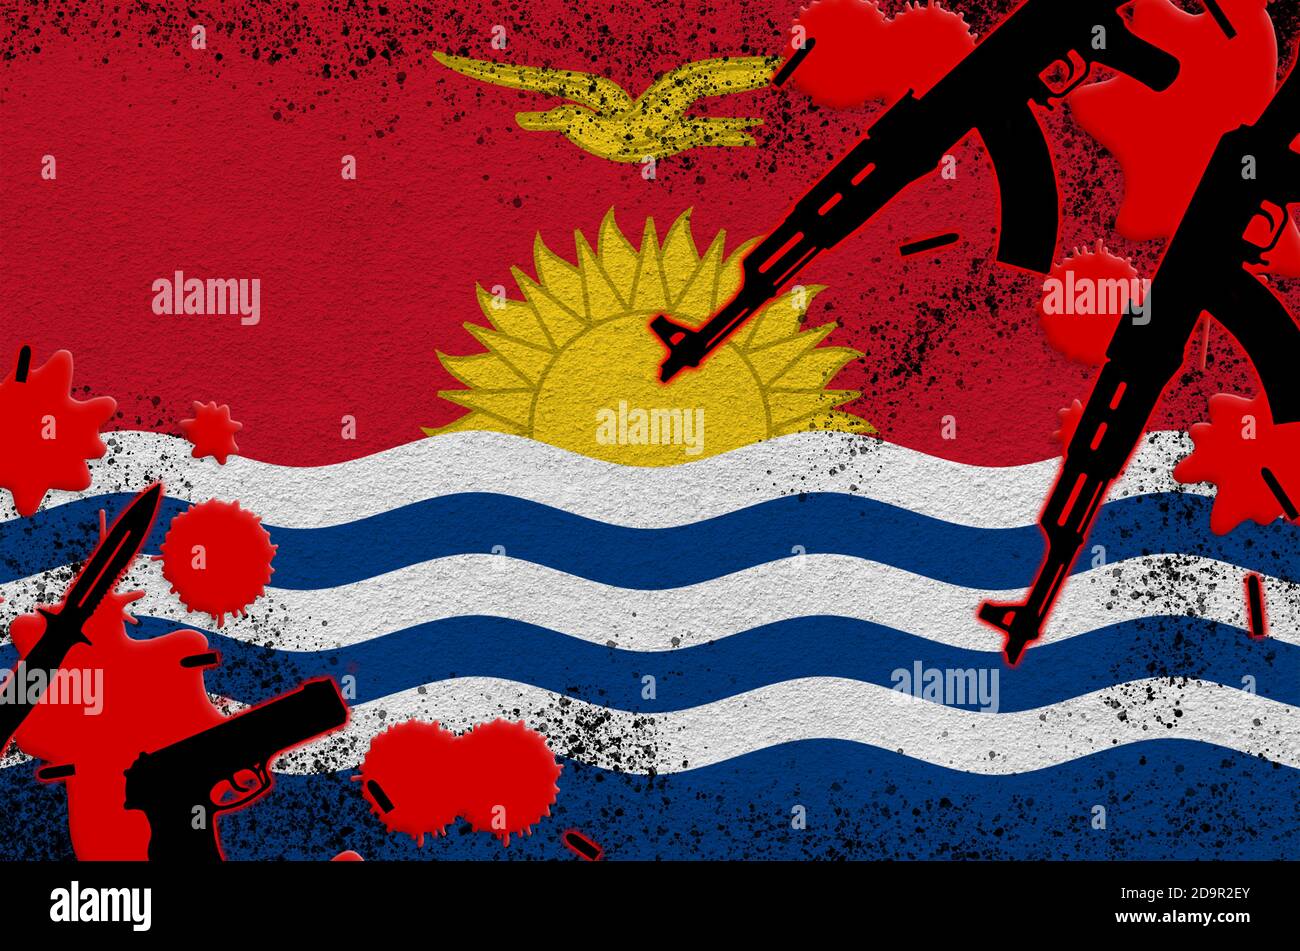 Kiribati flag and guns in red blood. Concept for terror attack and military operations. Gun trafficking Stock Photo